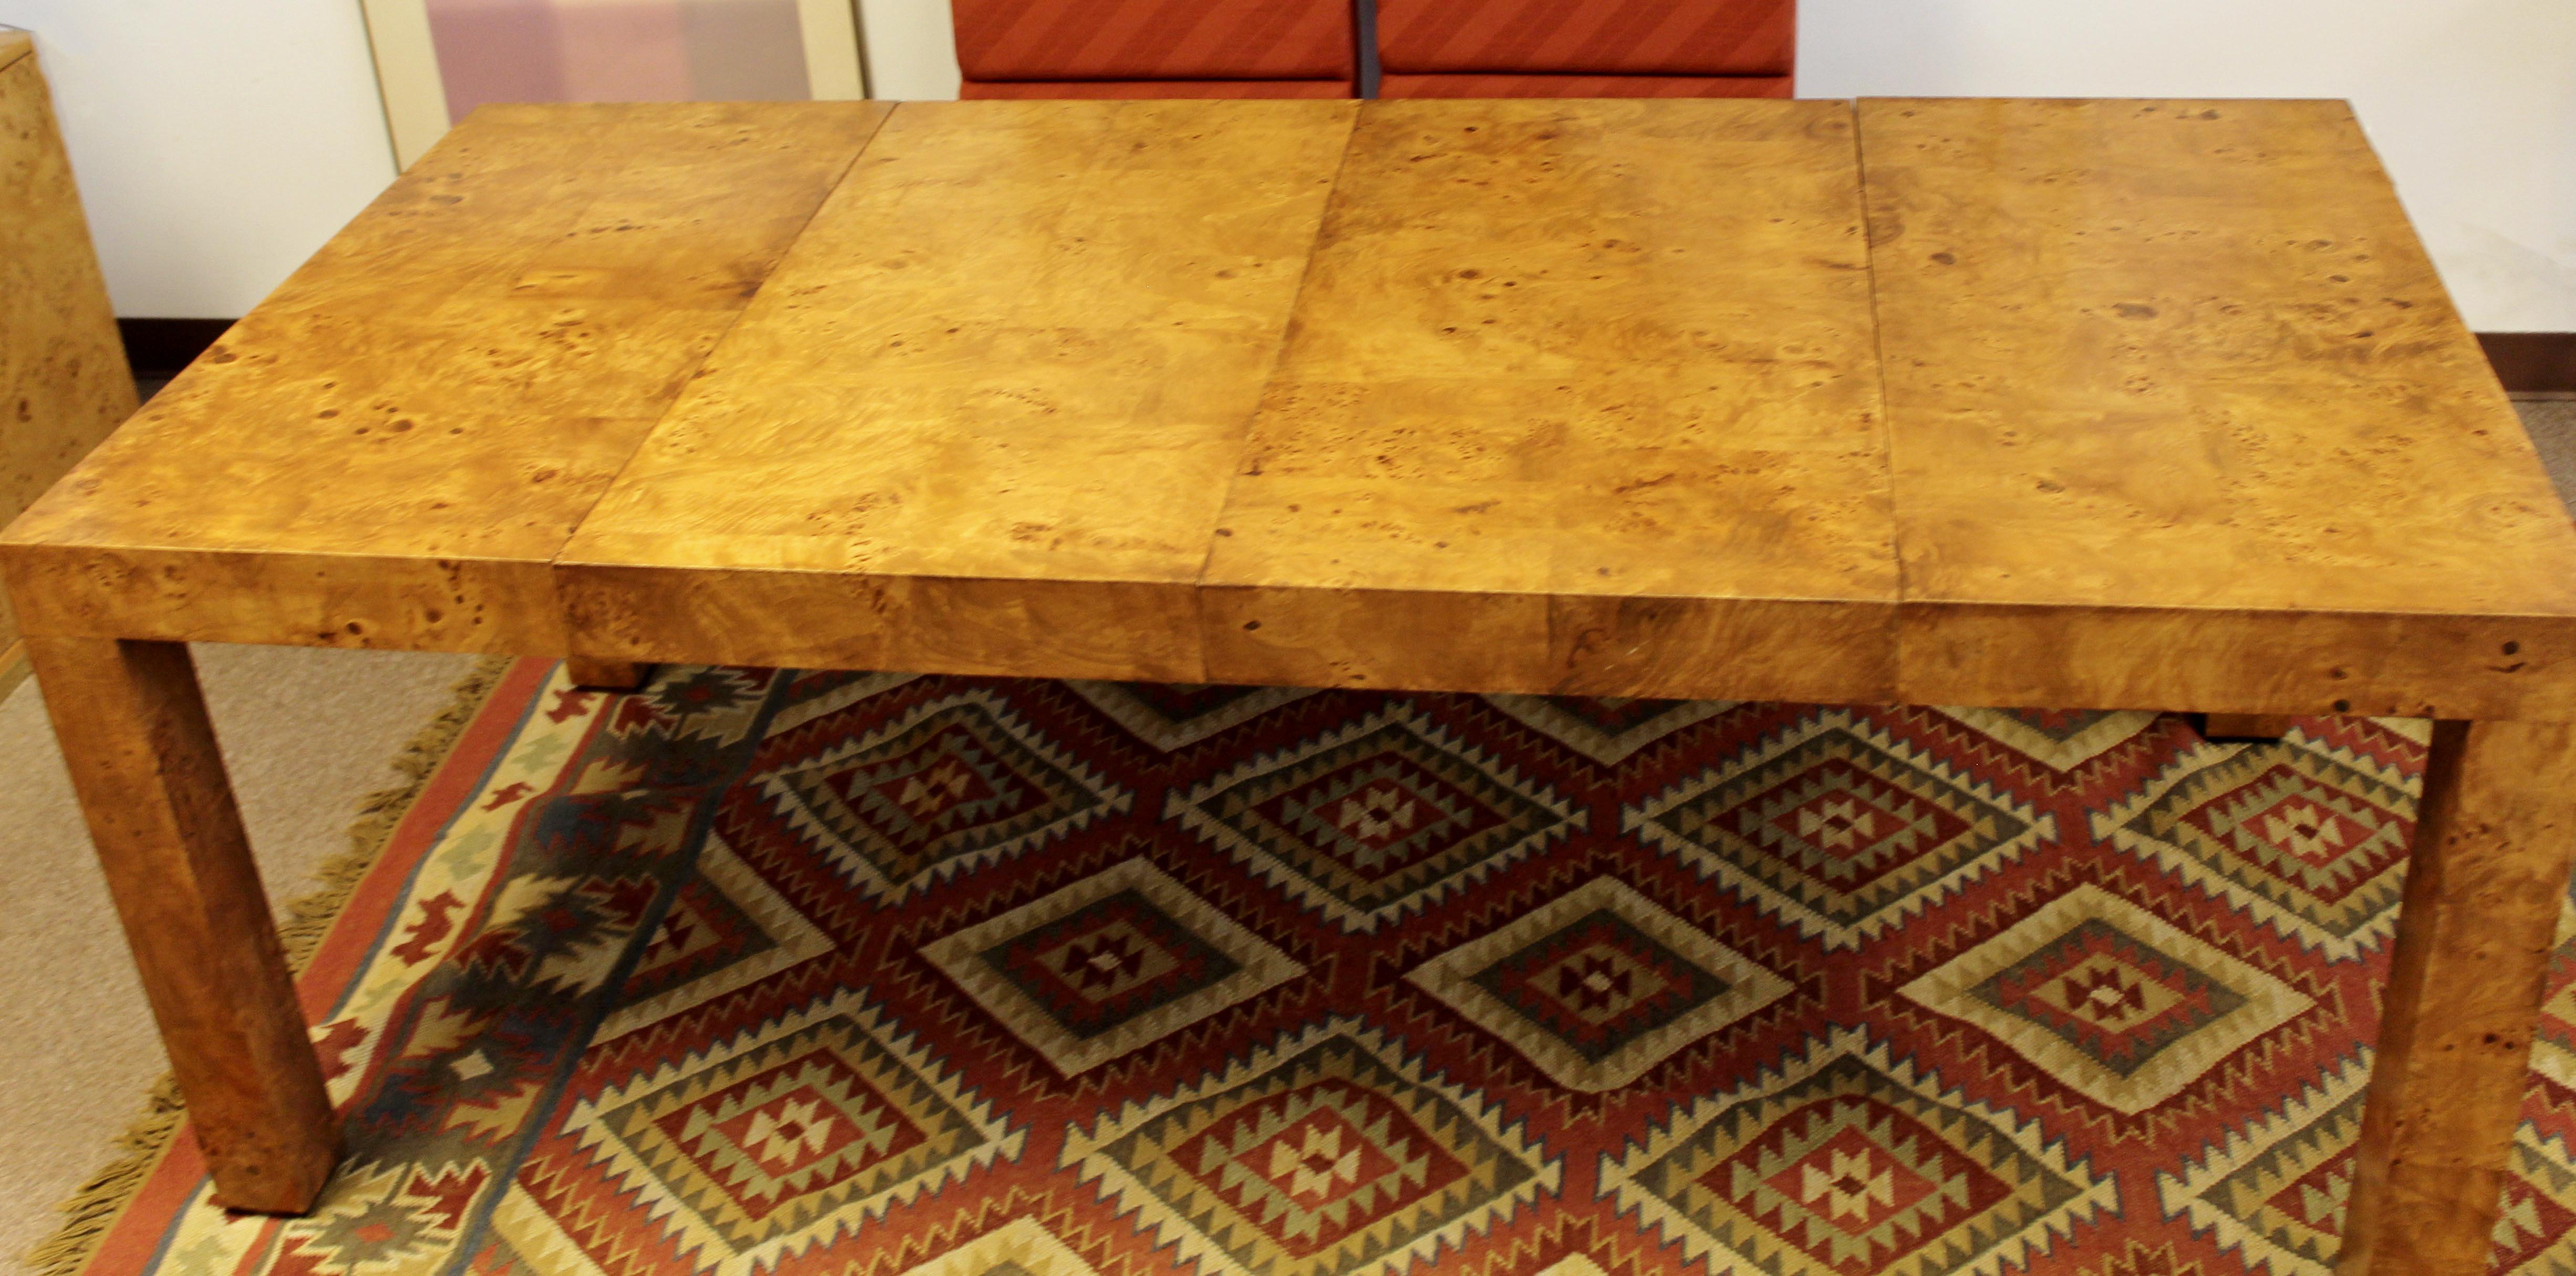 For your consideration is a remarkable, square dining table that opens with two leaves, made of burl wood, by Milo Baughman, circa the 1960s. In very good condition. The dimensions closed are 39